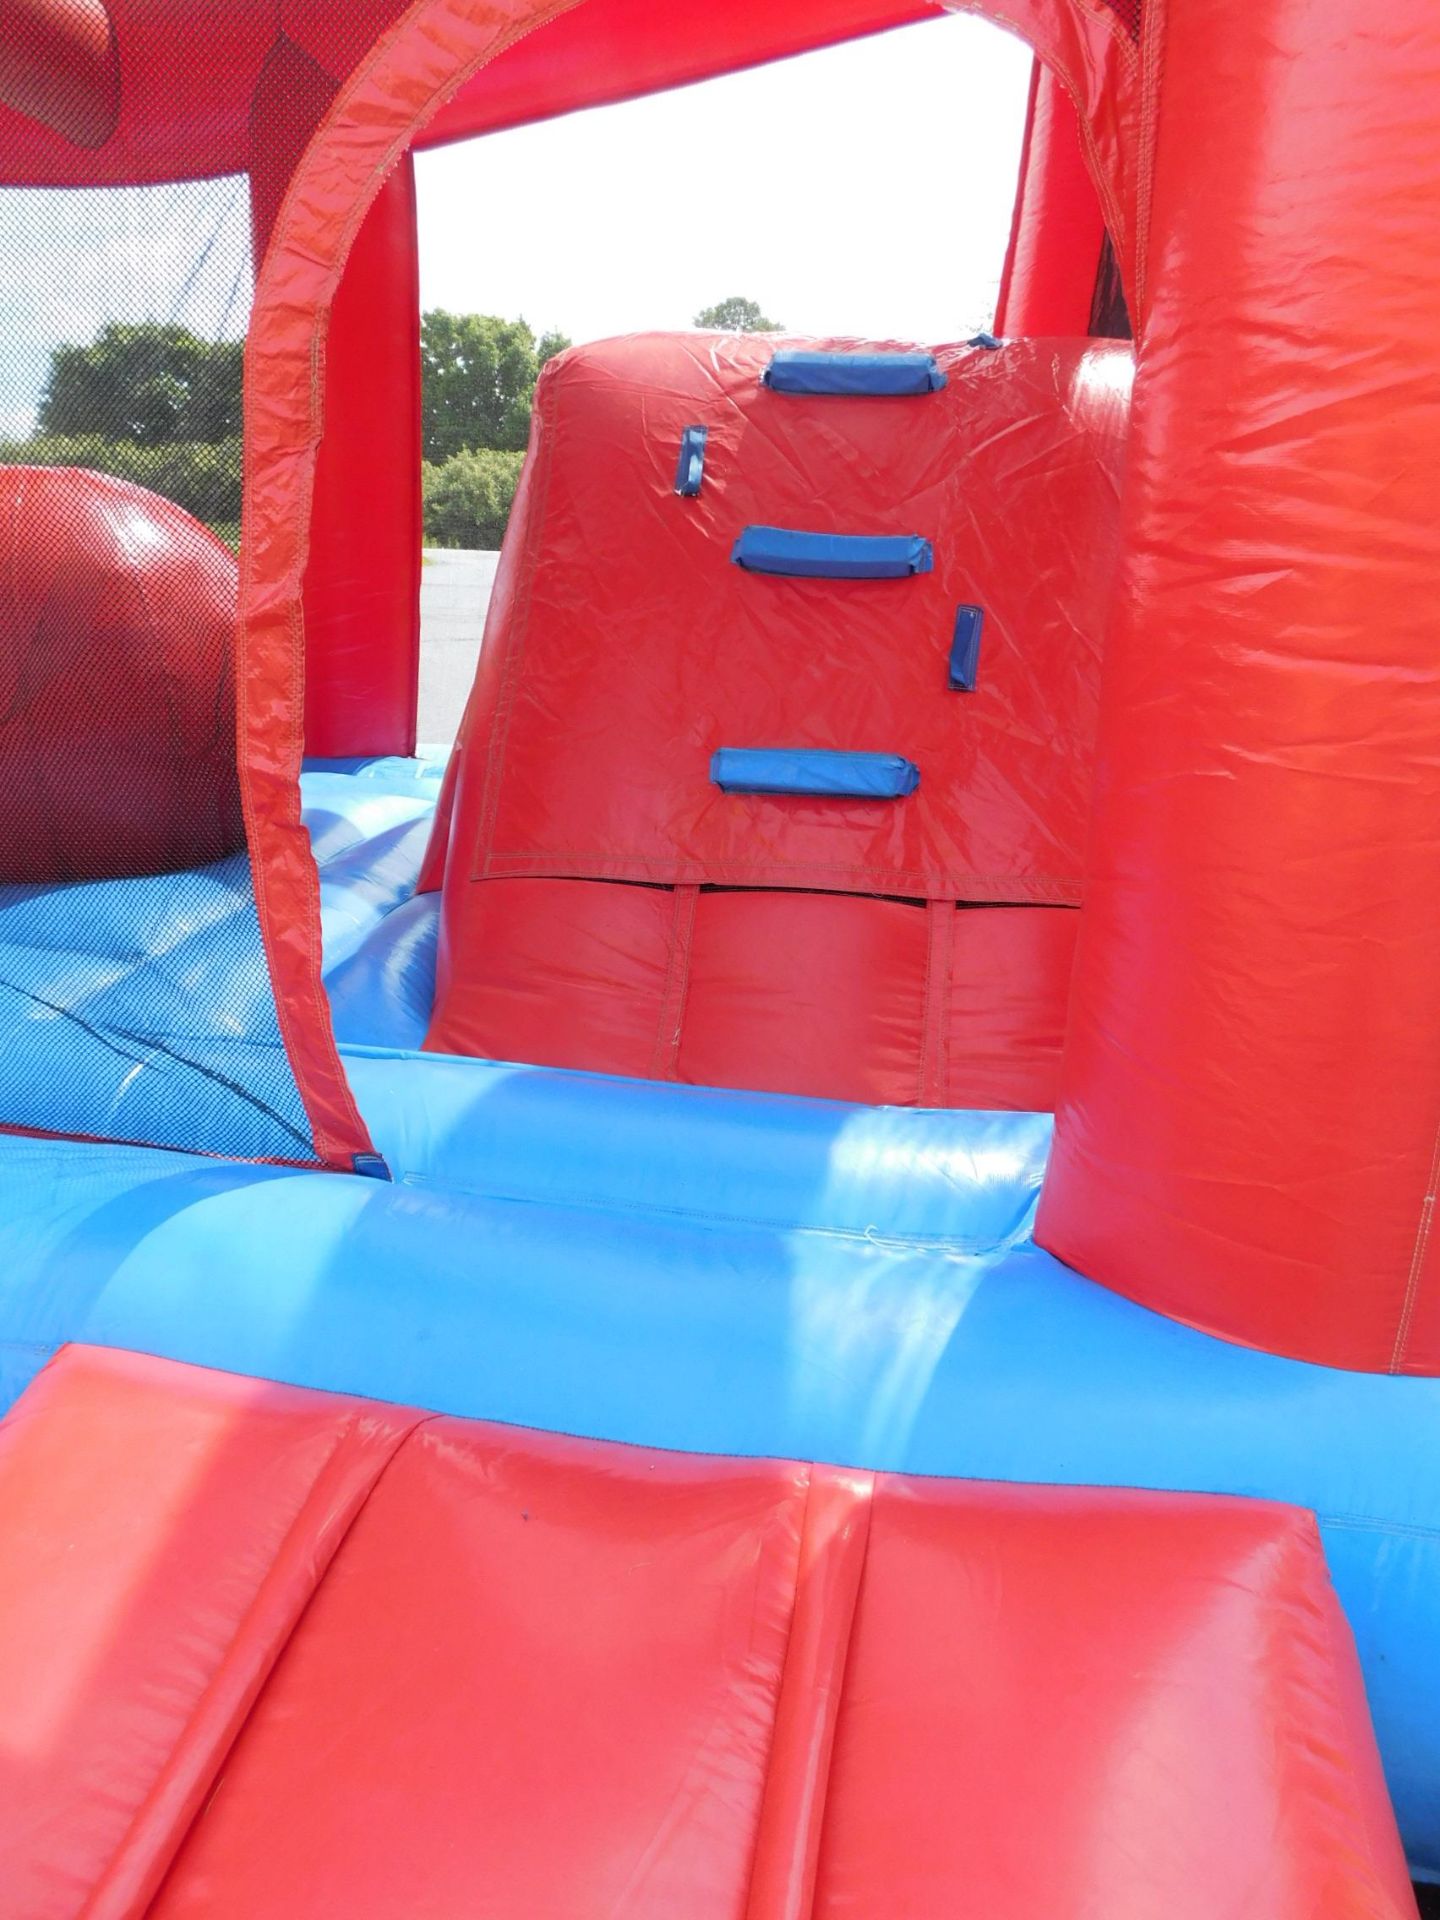 E-Z Inflatables Wiped Out Obstacle Course, 18'WX42'LX13'H #88 - Image 7 of 22